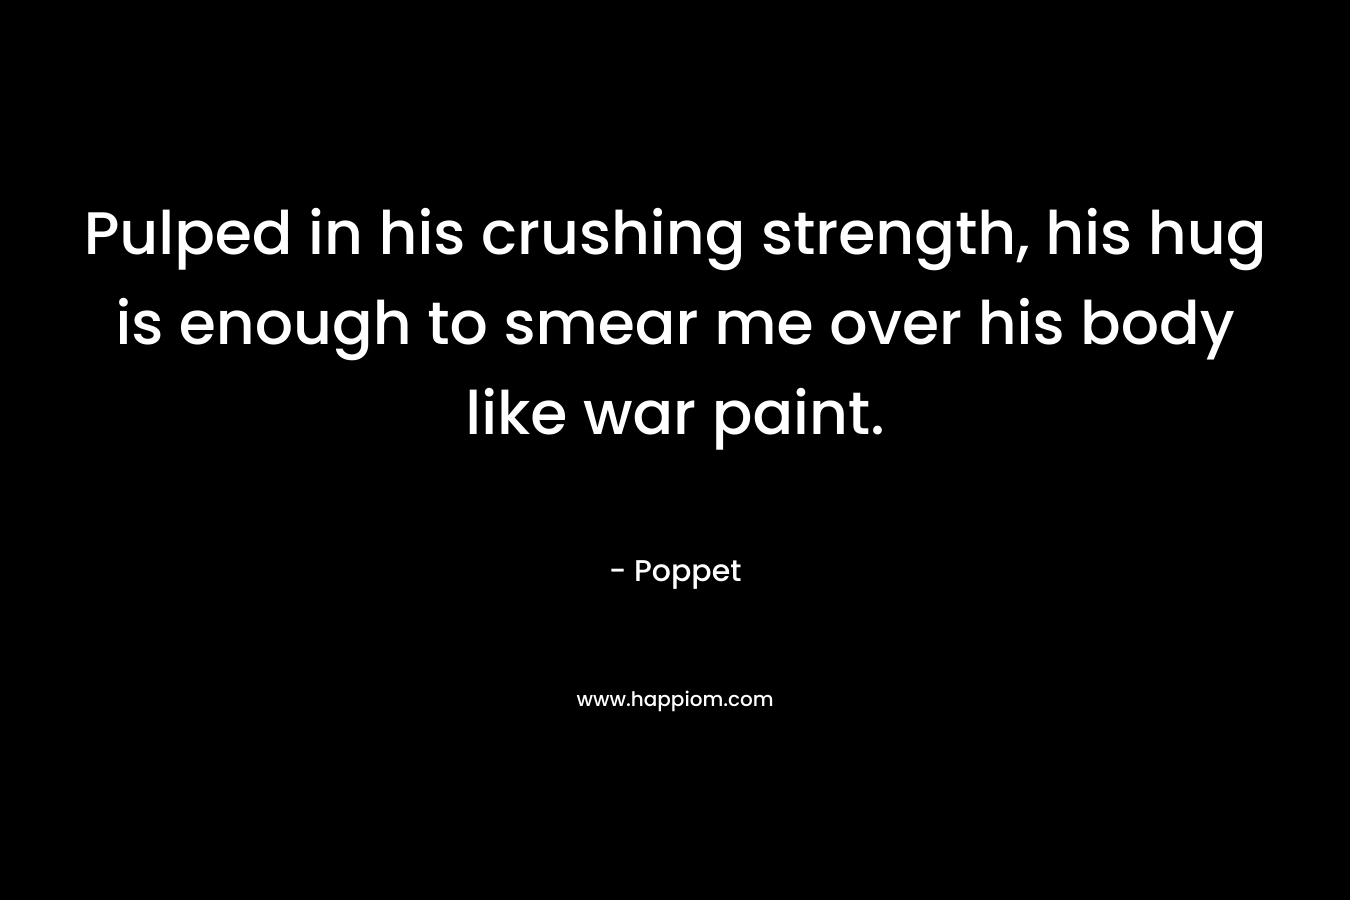 Pulped in his crushing strength, his hug is enough to smear me over his body like war paint. – Poppet